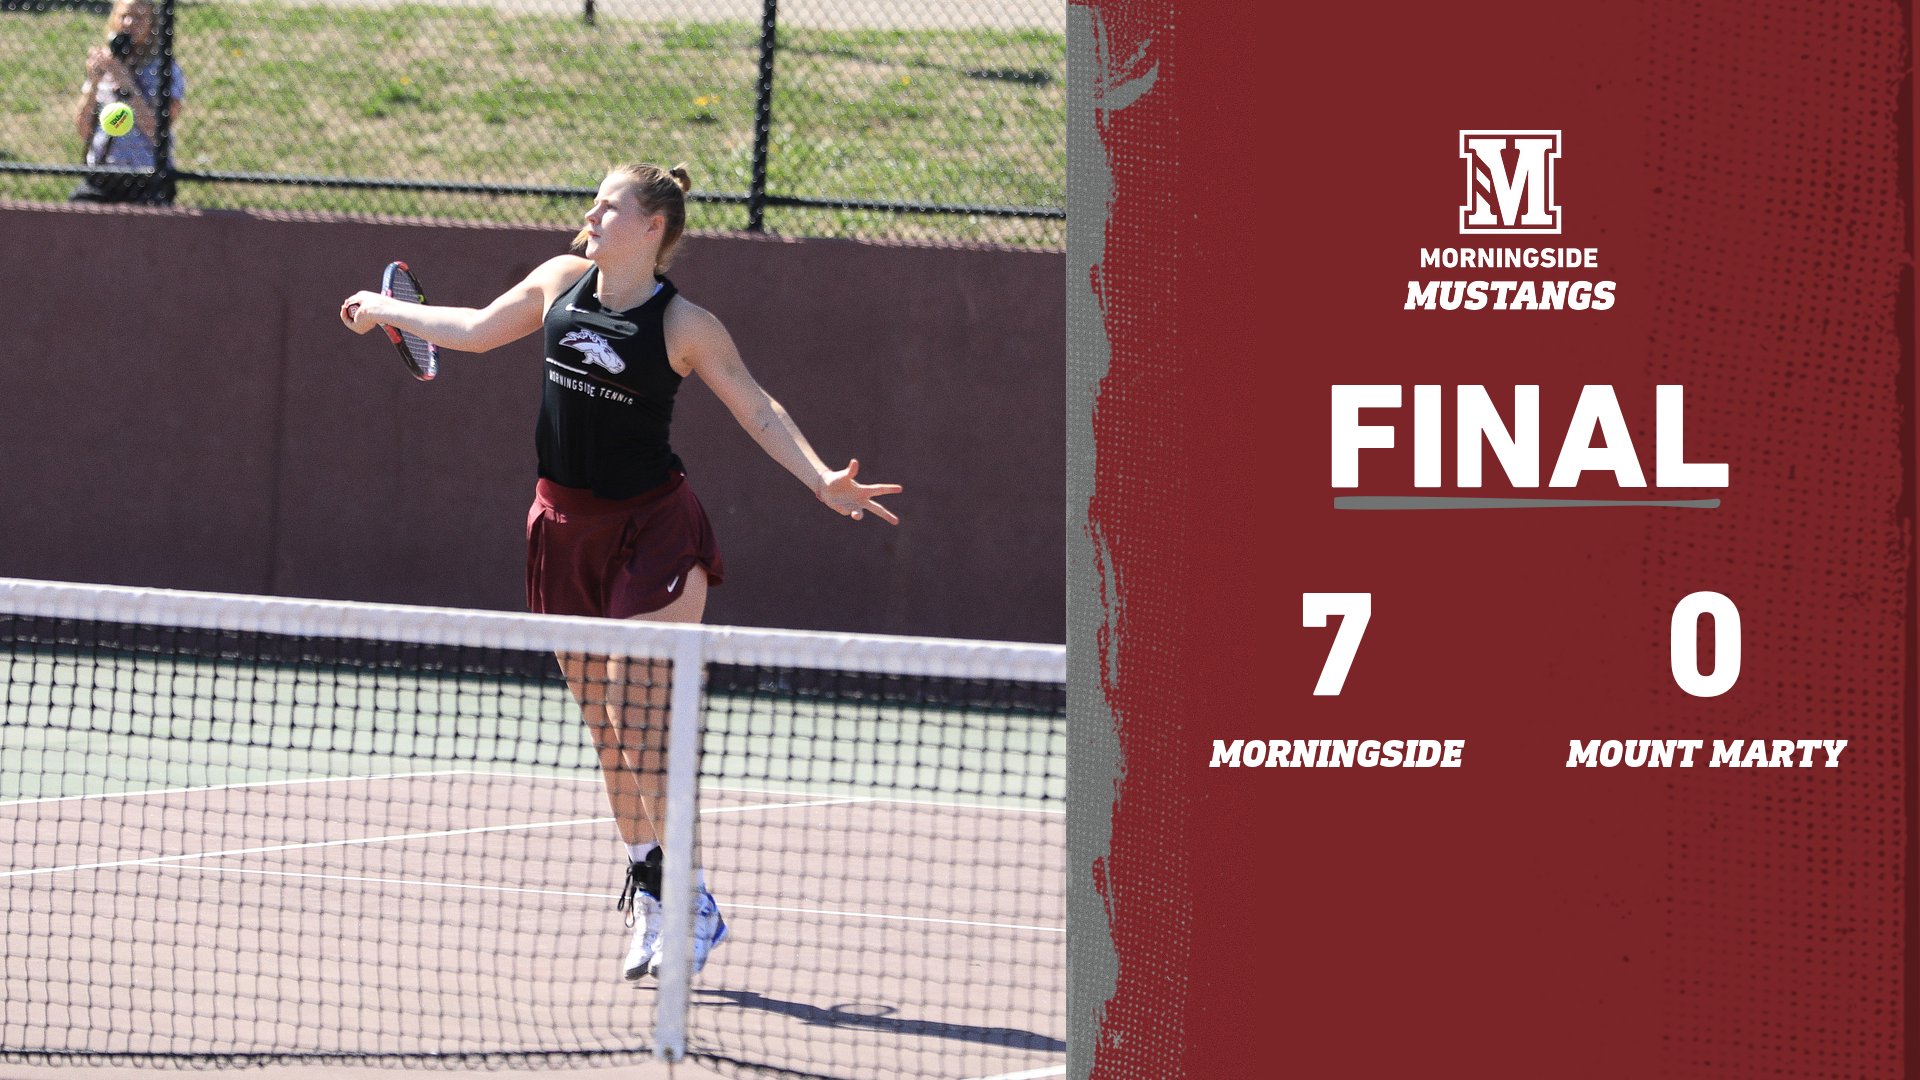 Women win 7-0 with conference finale on the horizon